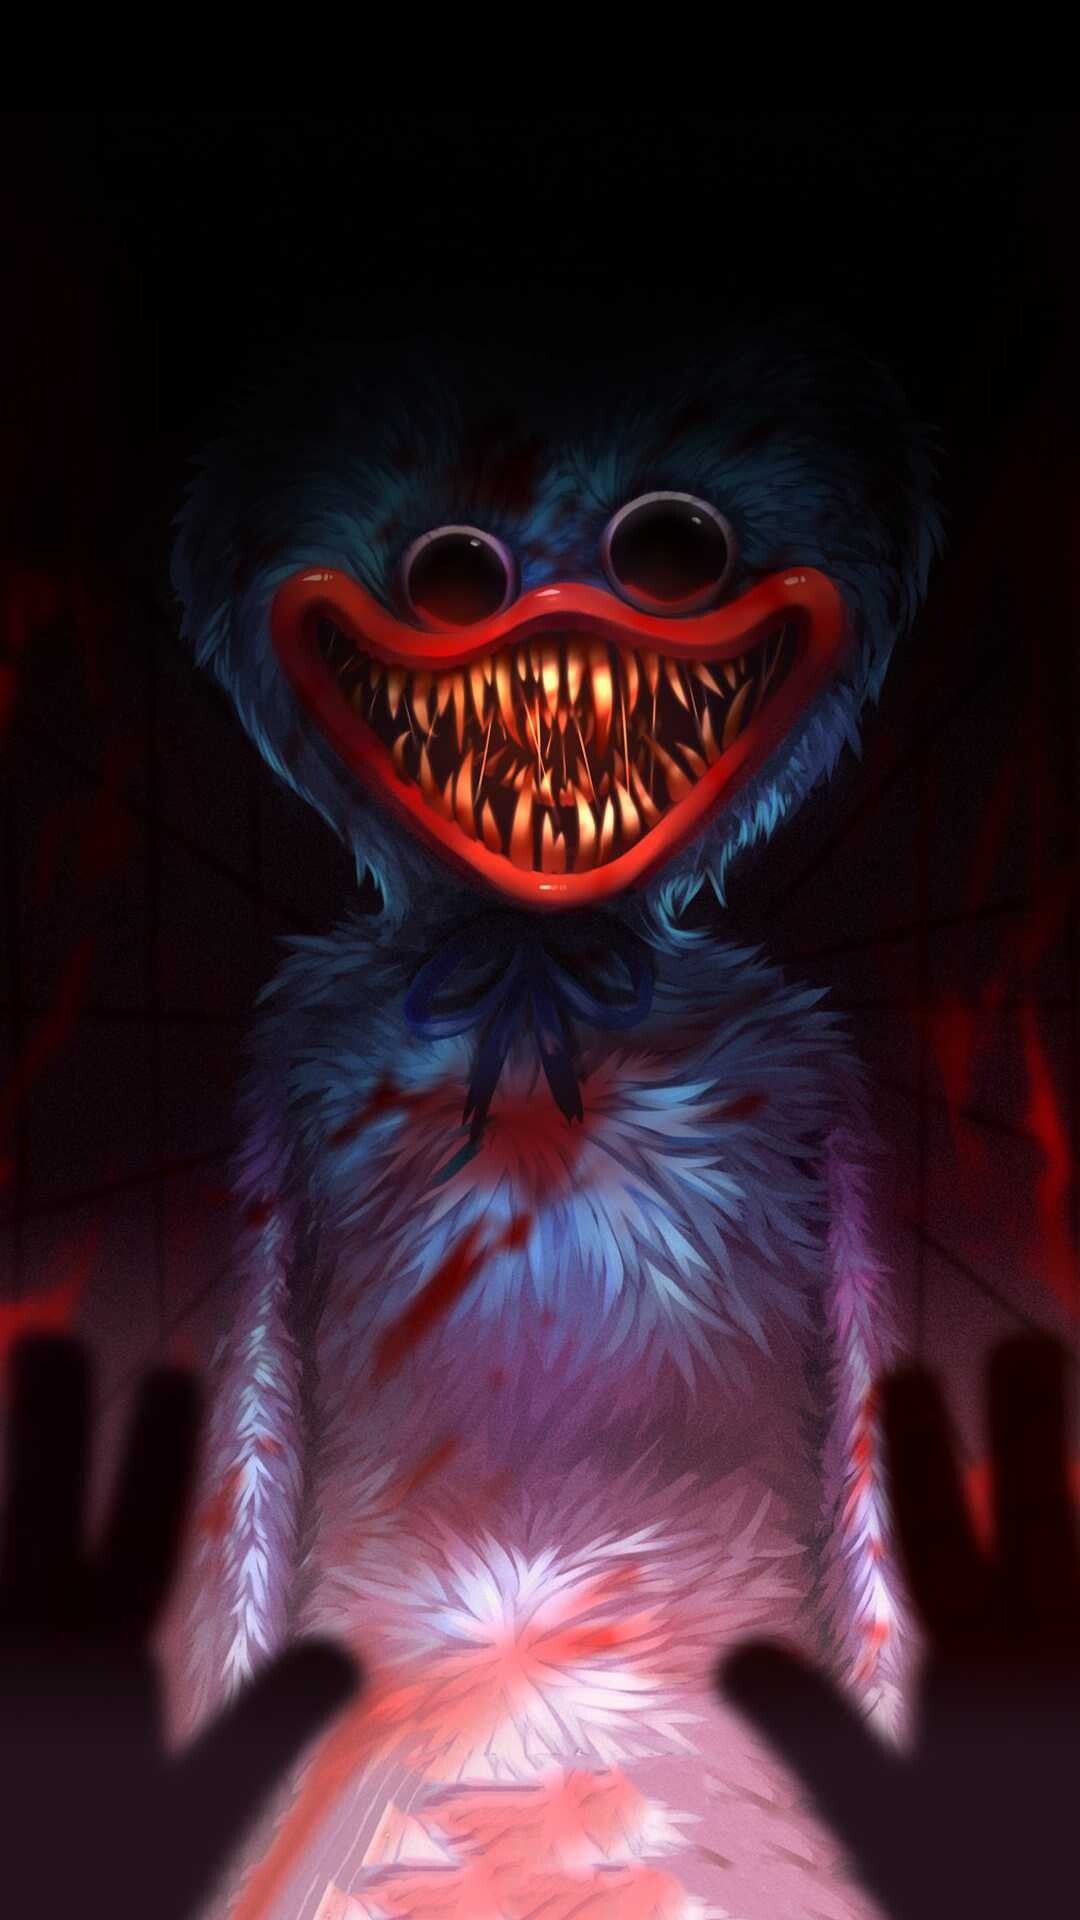 Poppy Playtime: Huggy Wuggy, Having another mouth inside his mouth, A bloodthirsty creature, Killing with its teeth. 1080x1920 Full HD Wallpaper.